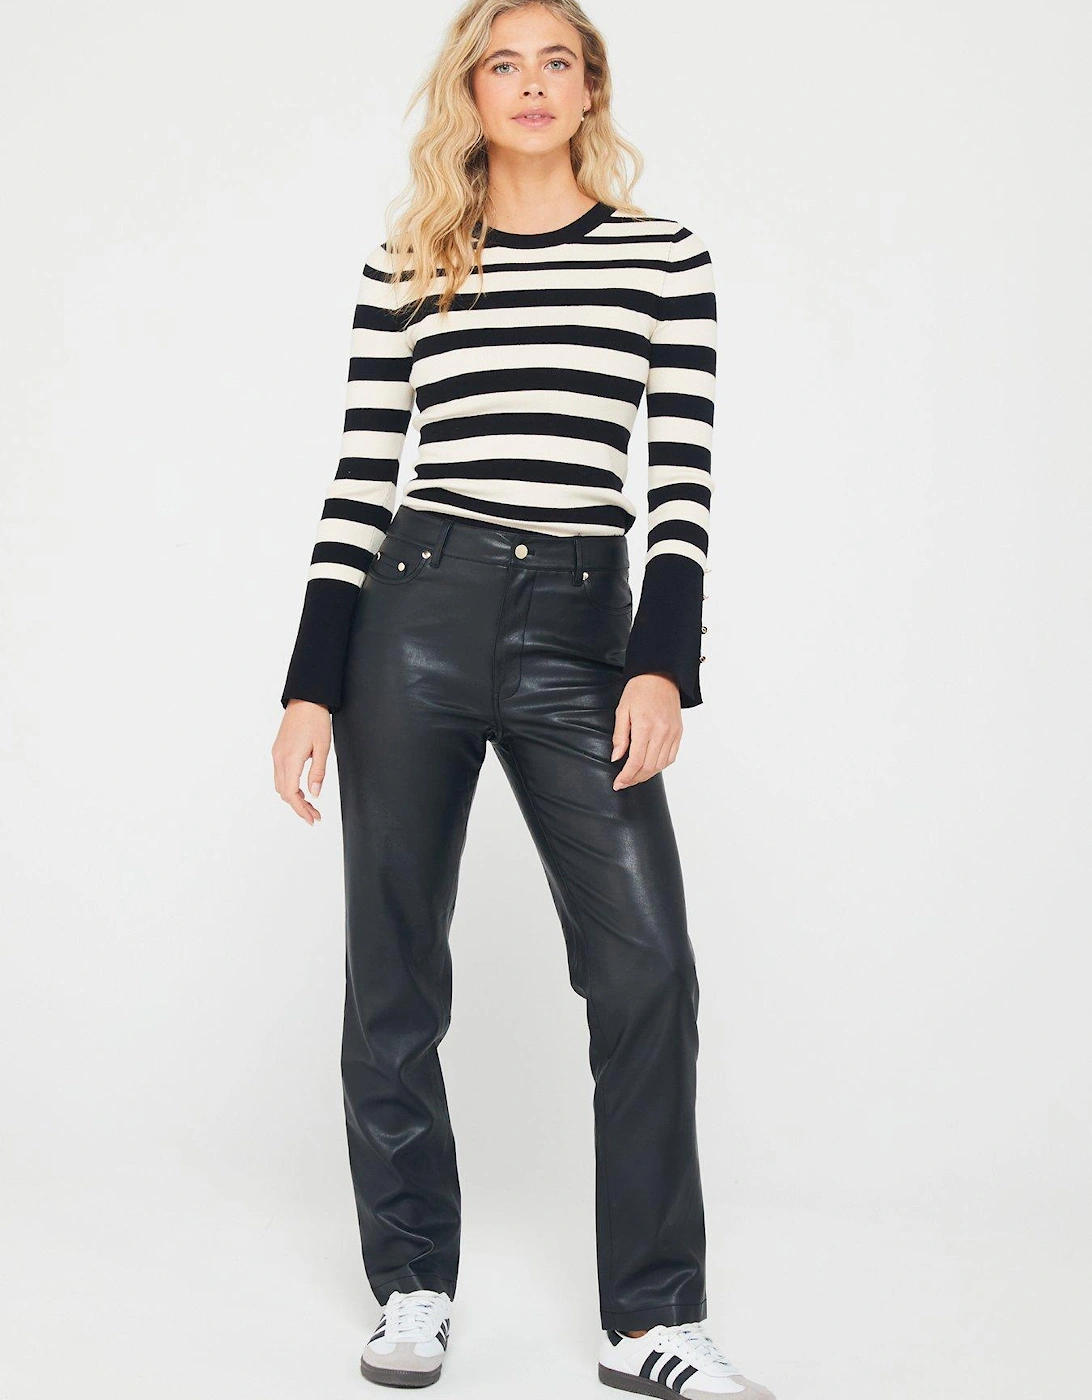 Crew Neck Stripe Knitted Top - Black and Ivory